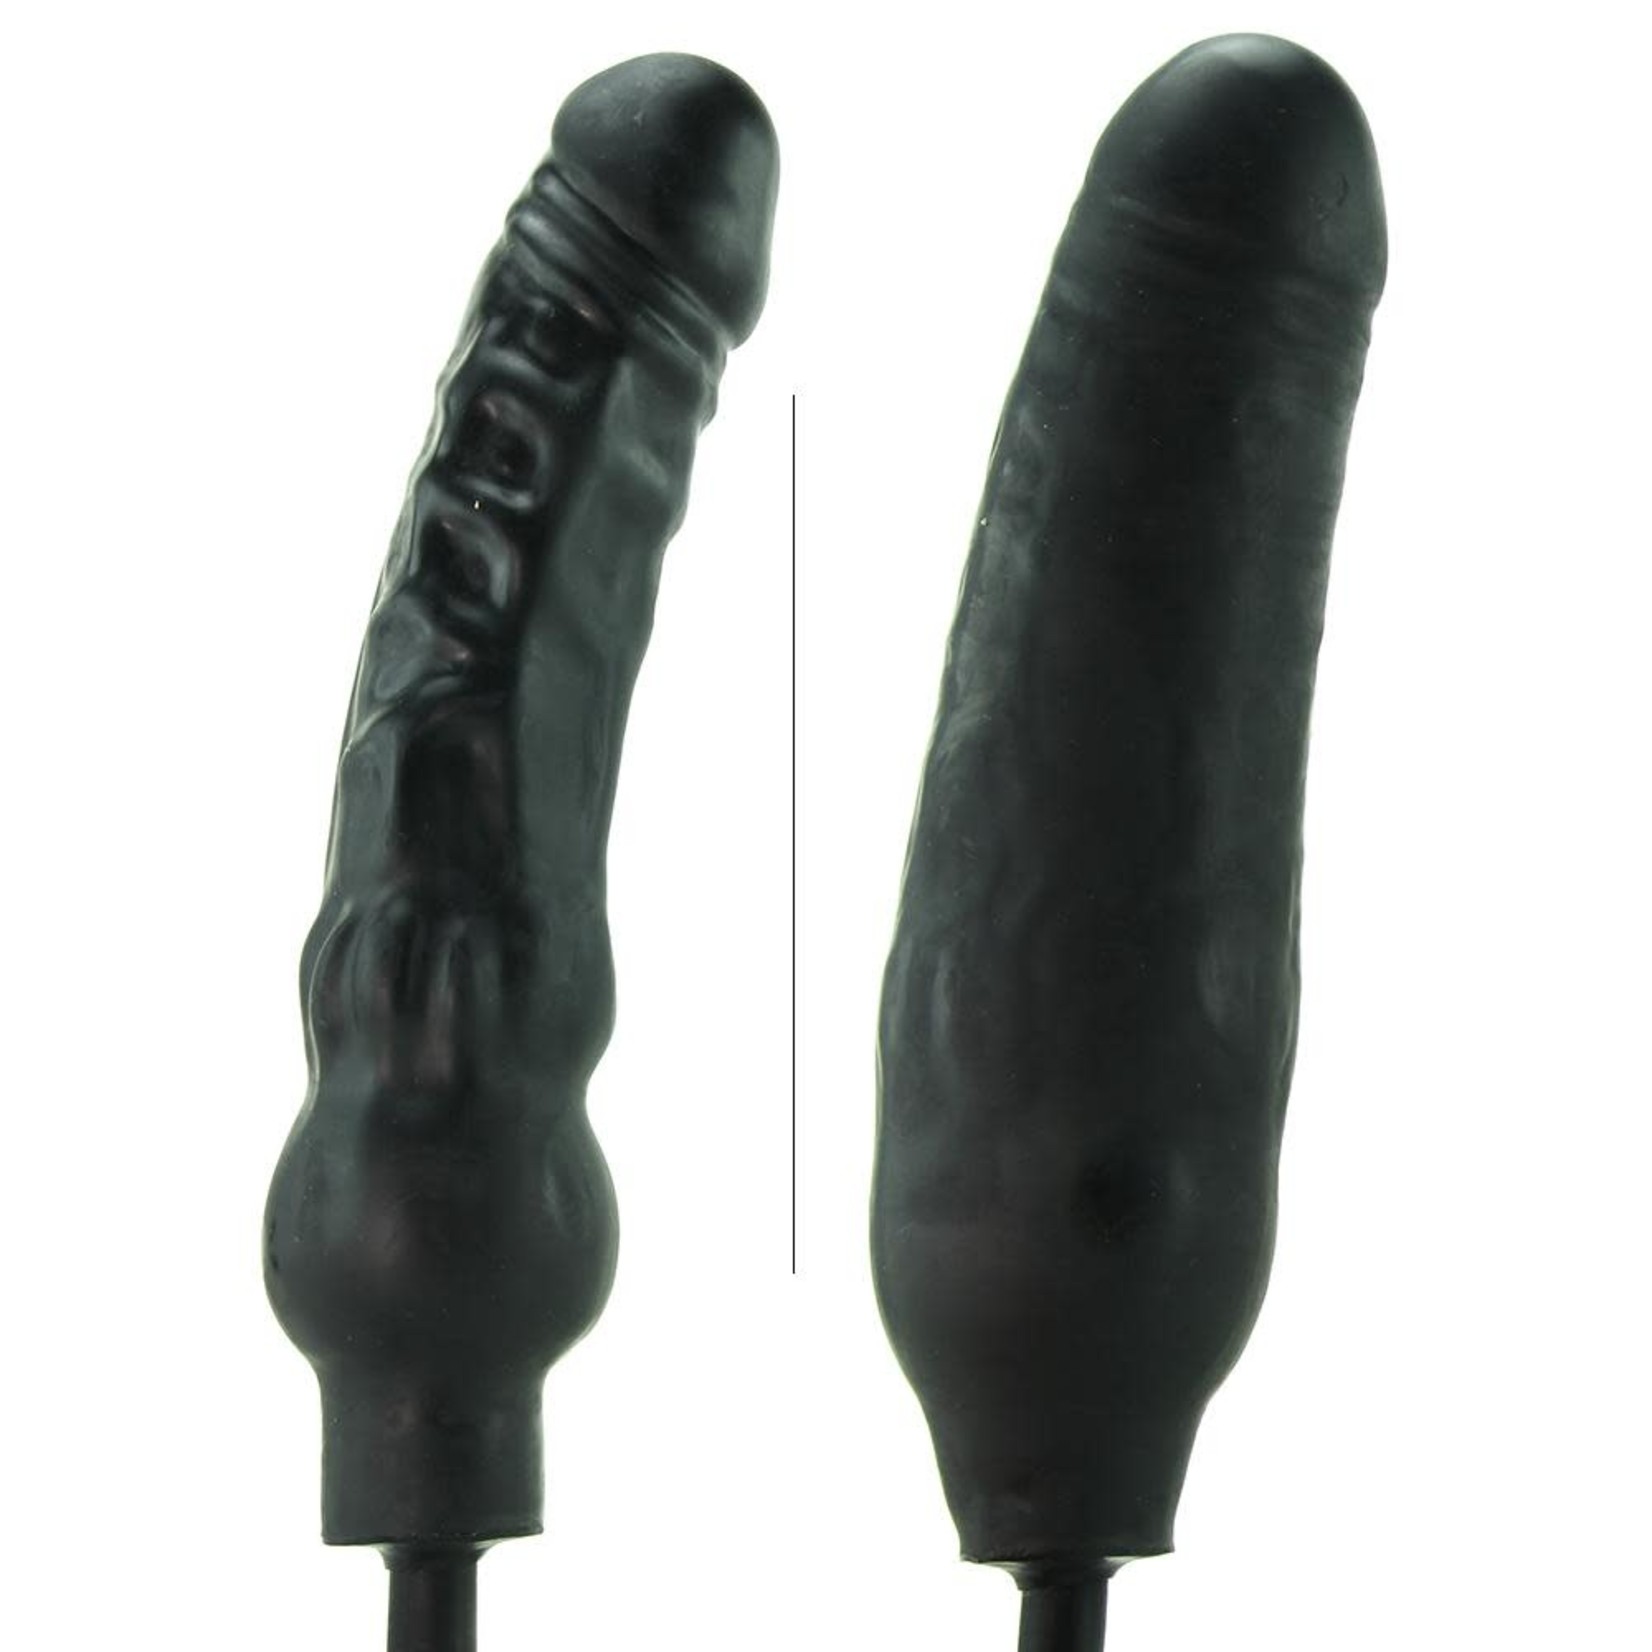 MASTER SERIES MASTER SERIES - PRIMAL - INFLATABLE DONG